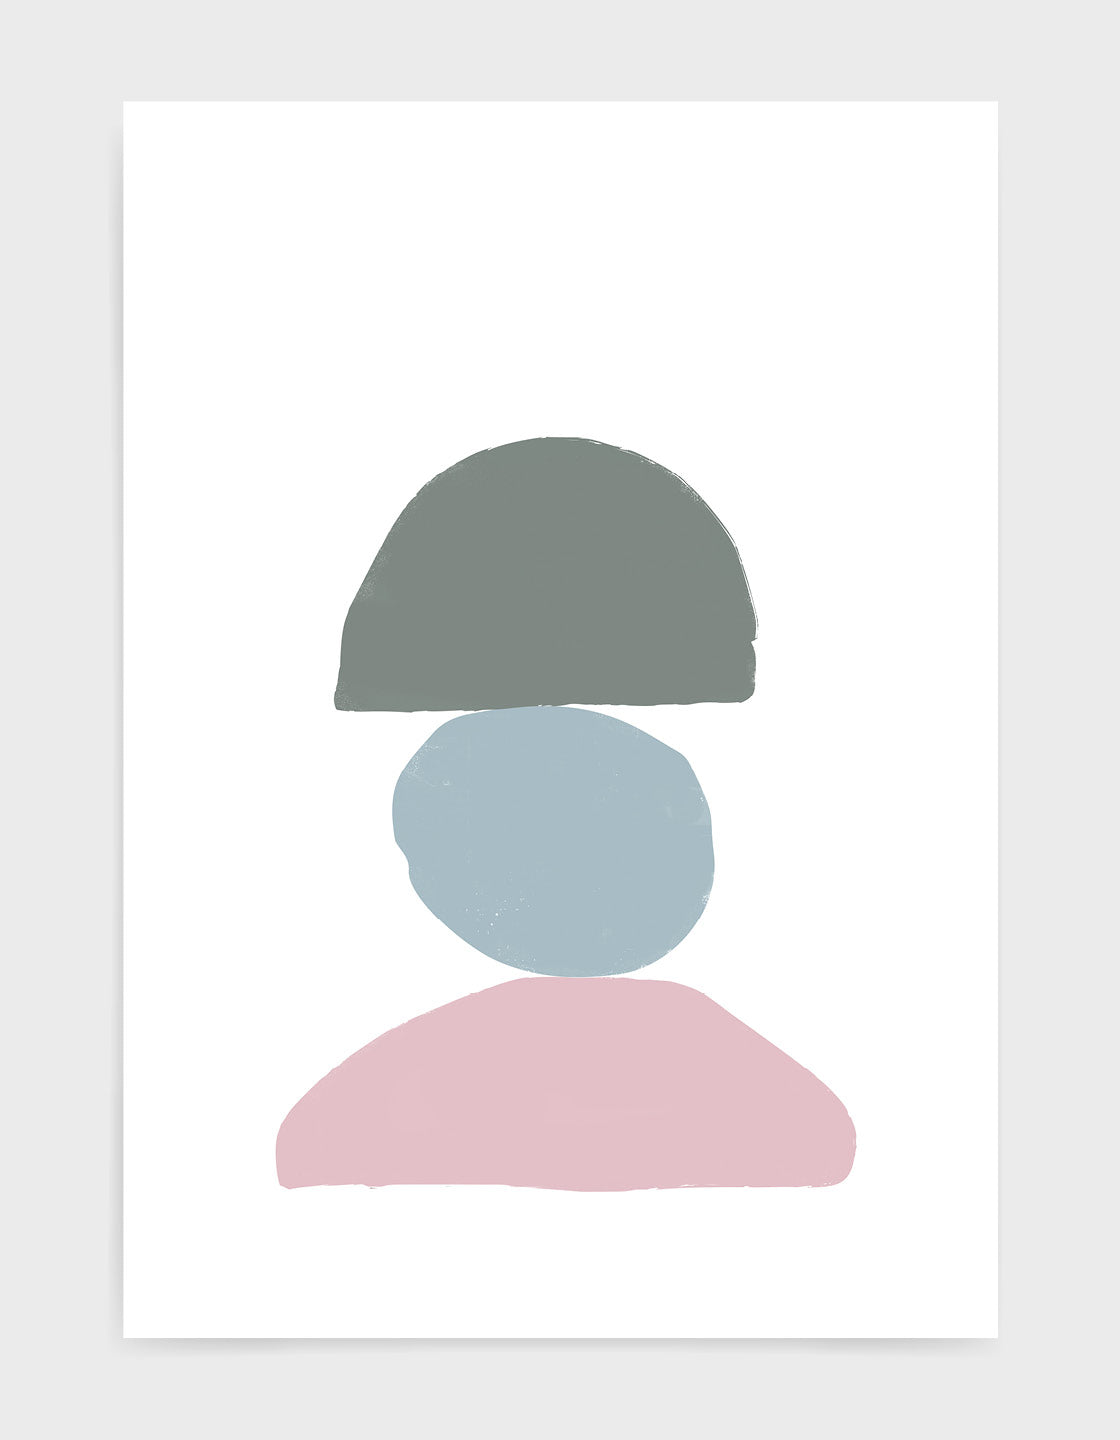 Minimal screen print style art print featuring three curved stone shapes sat on top of each other. One pink semi circle, a pale blue circle and greeny grey semi circle on top